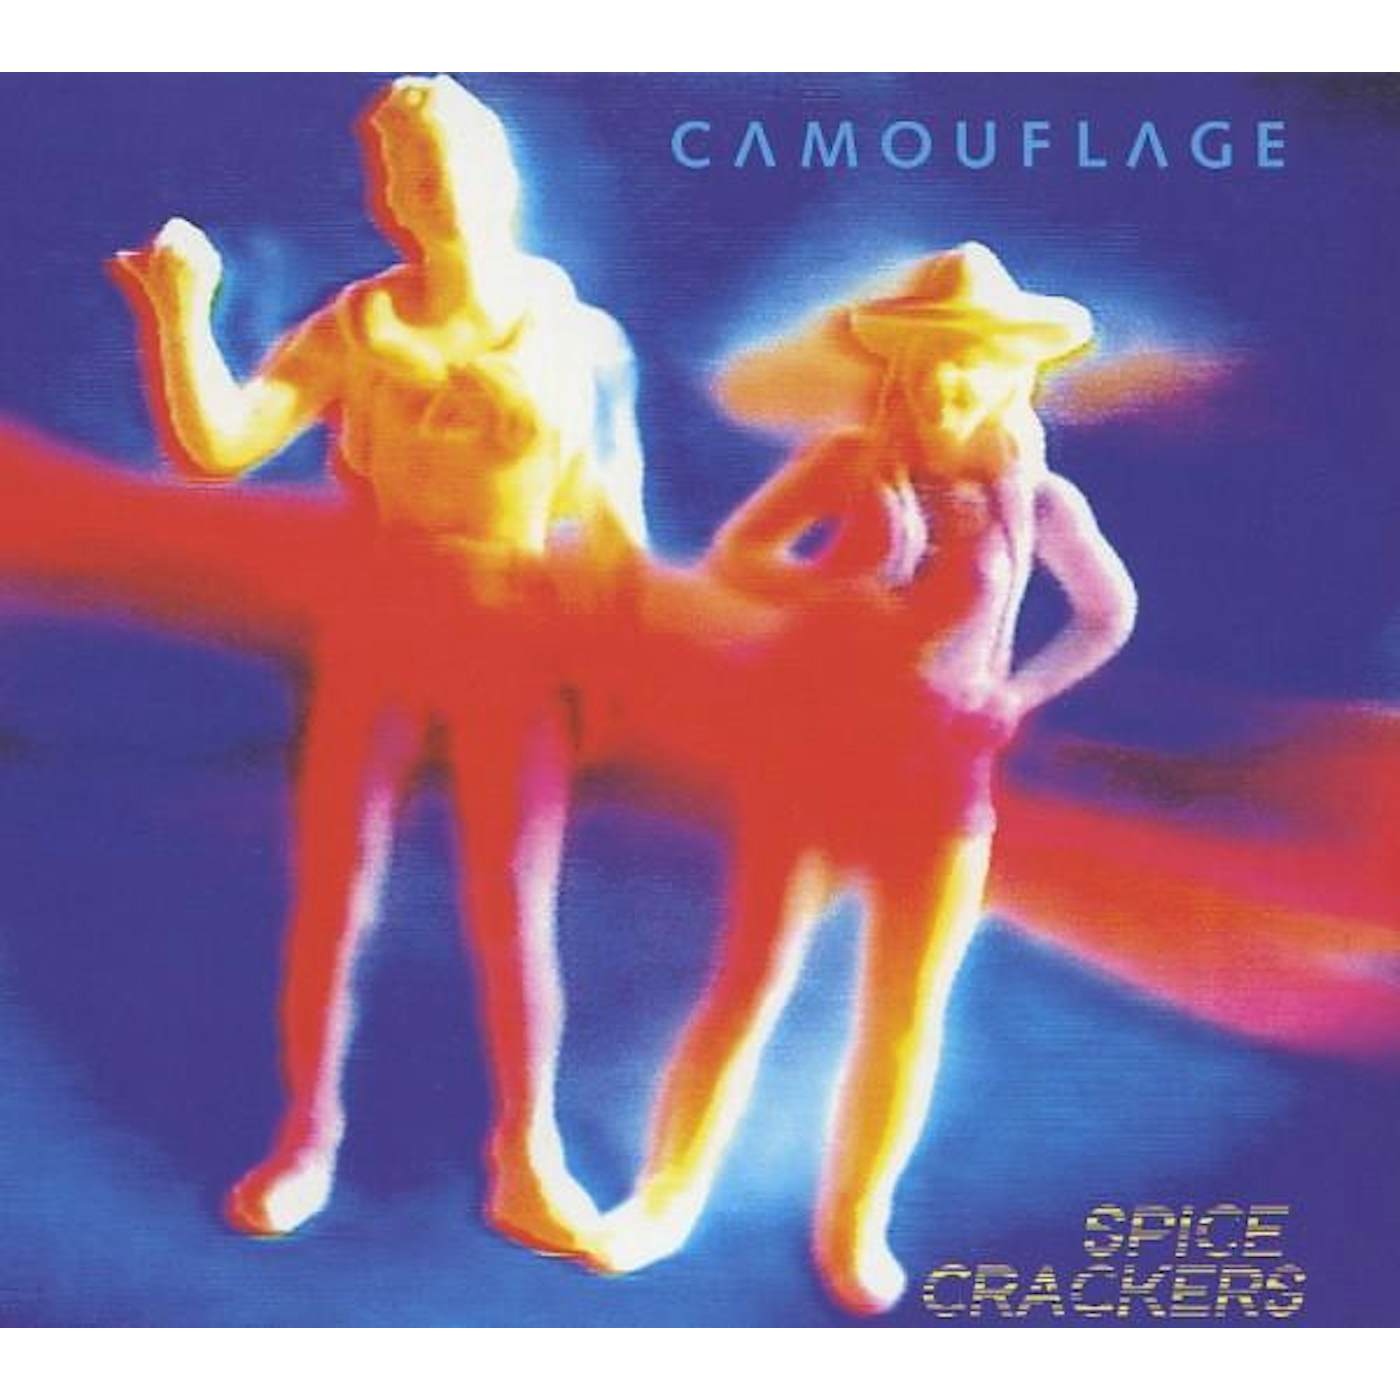 Camouflage SPICE CRACKERS (2CD) CD